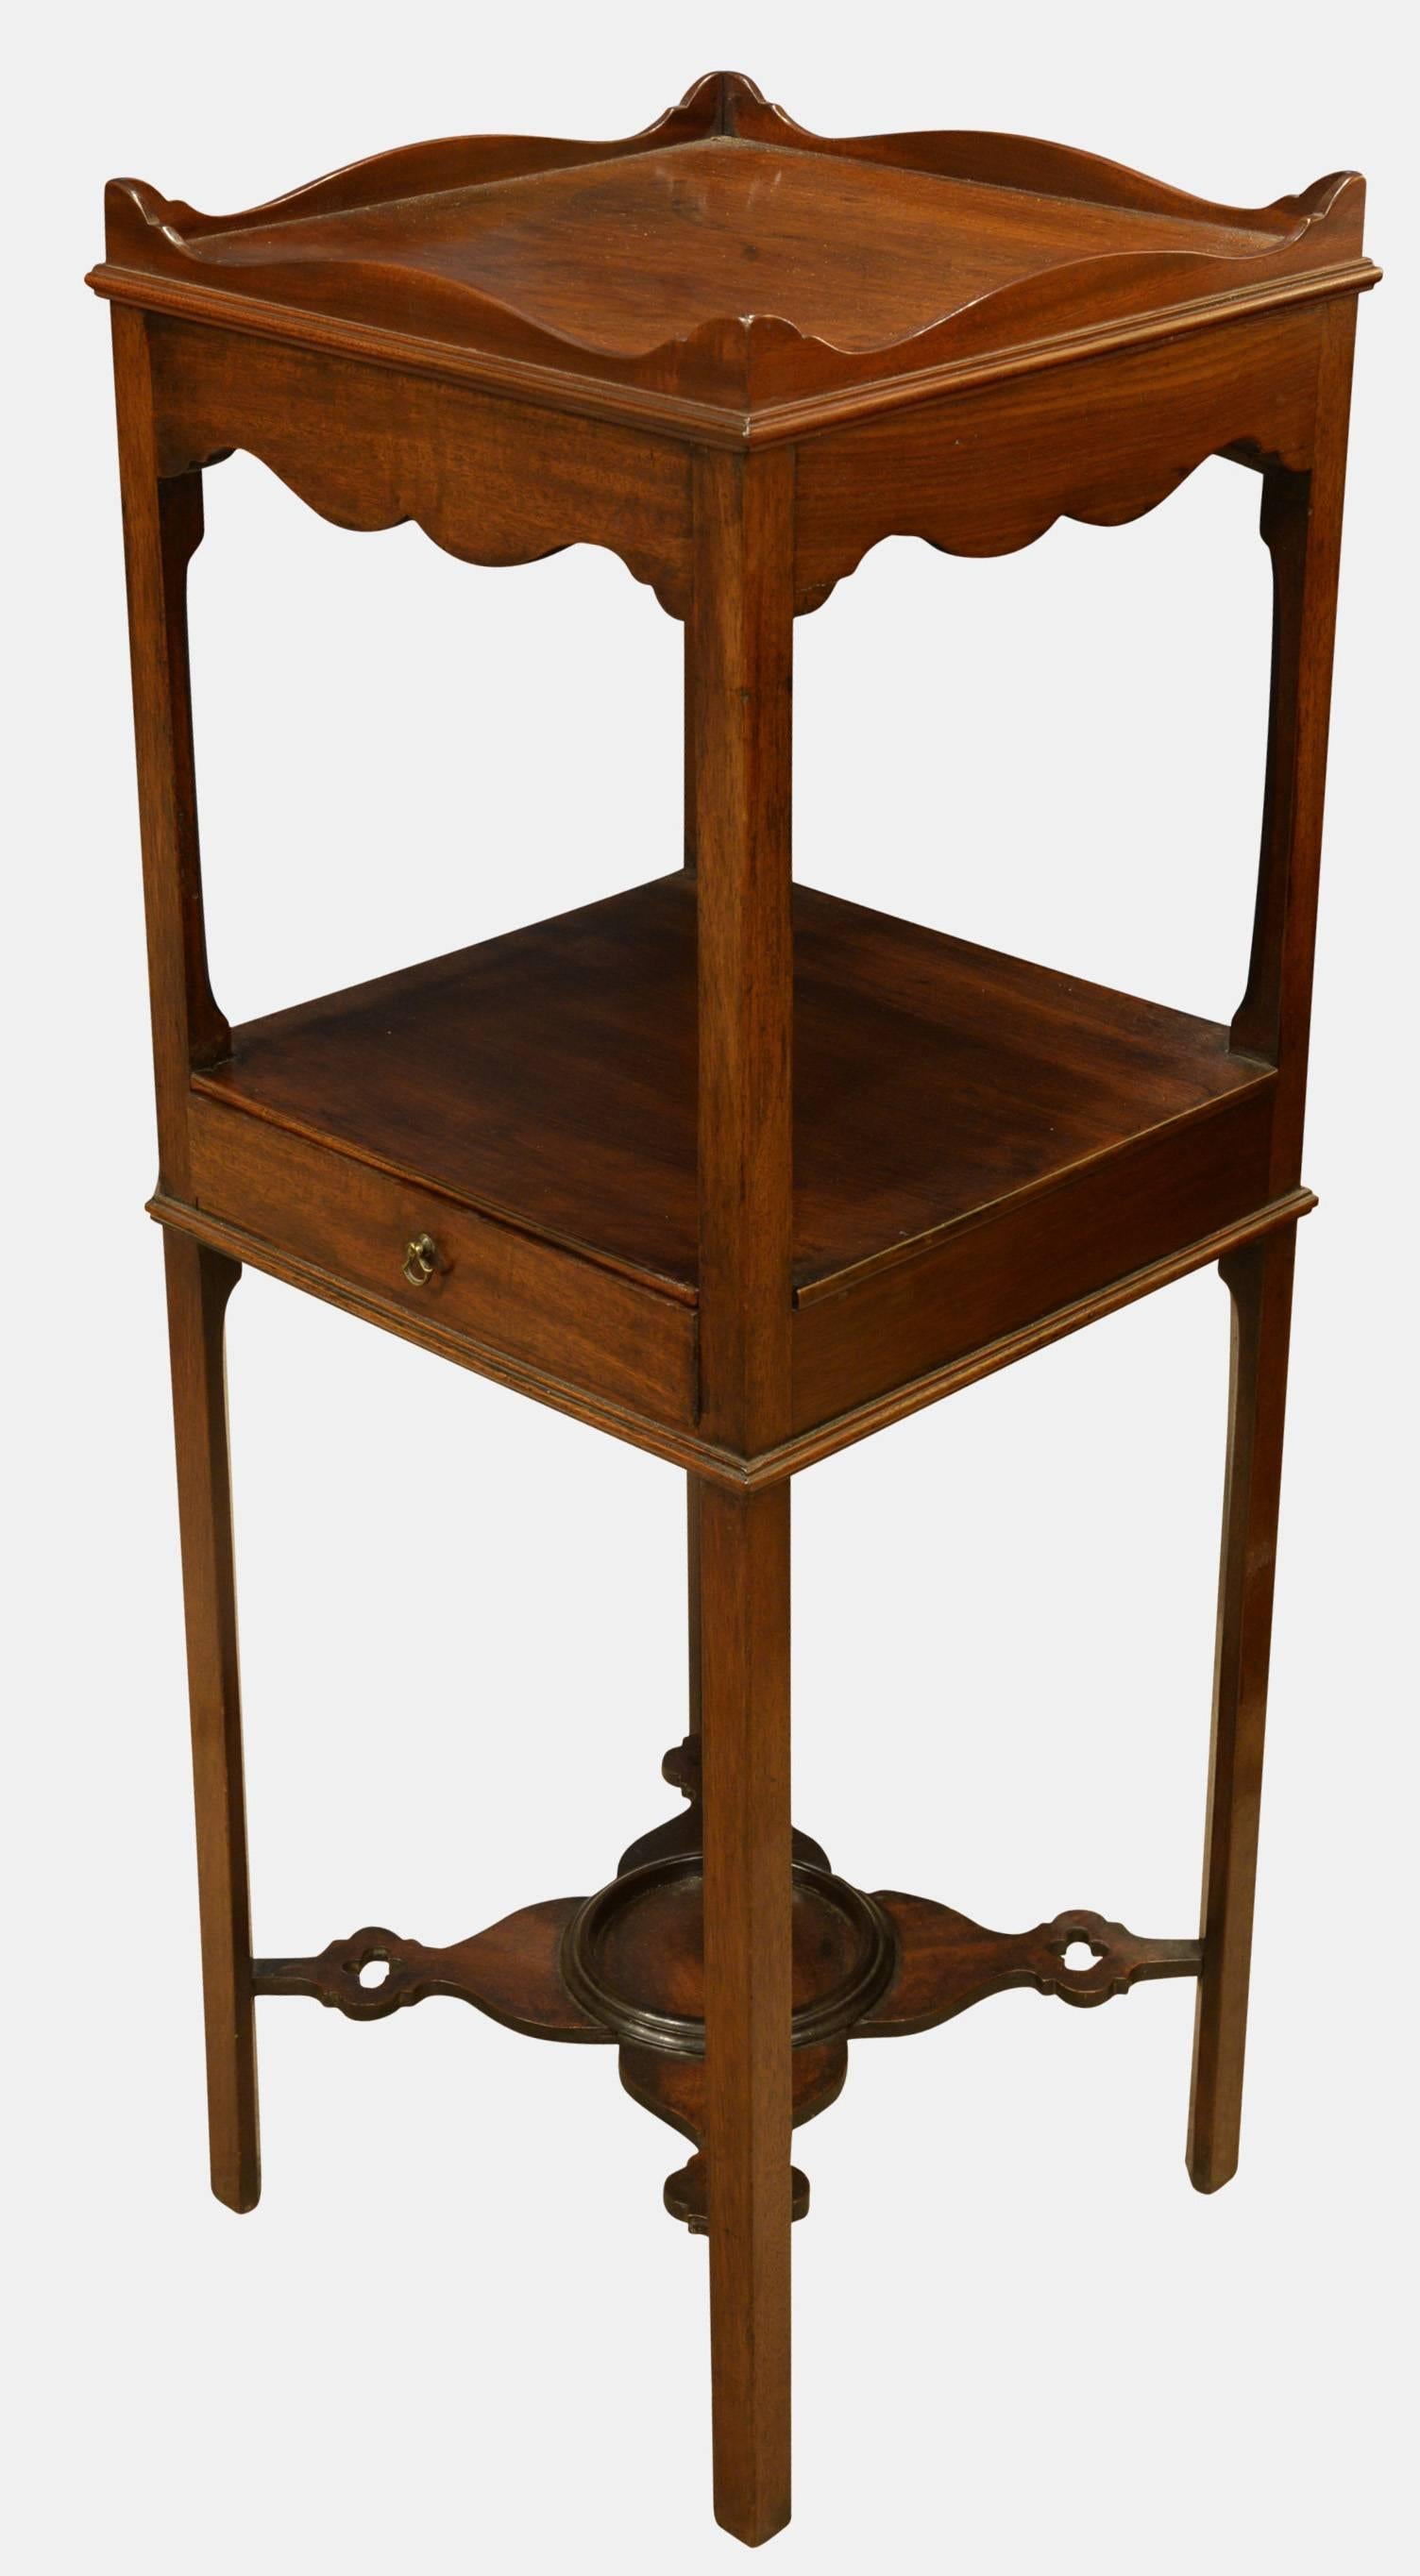 George III mahogany shaving stand with a fine pierced stretcher, centre drawer and galleried top,

circa 1760.